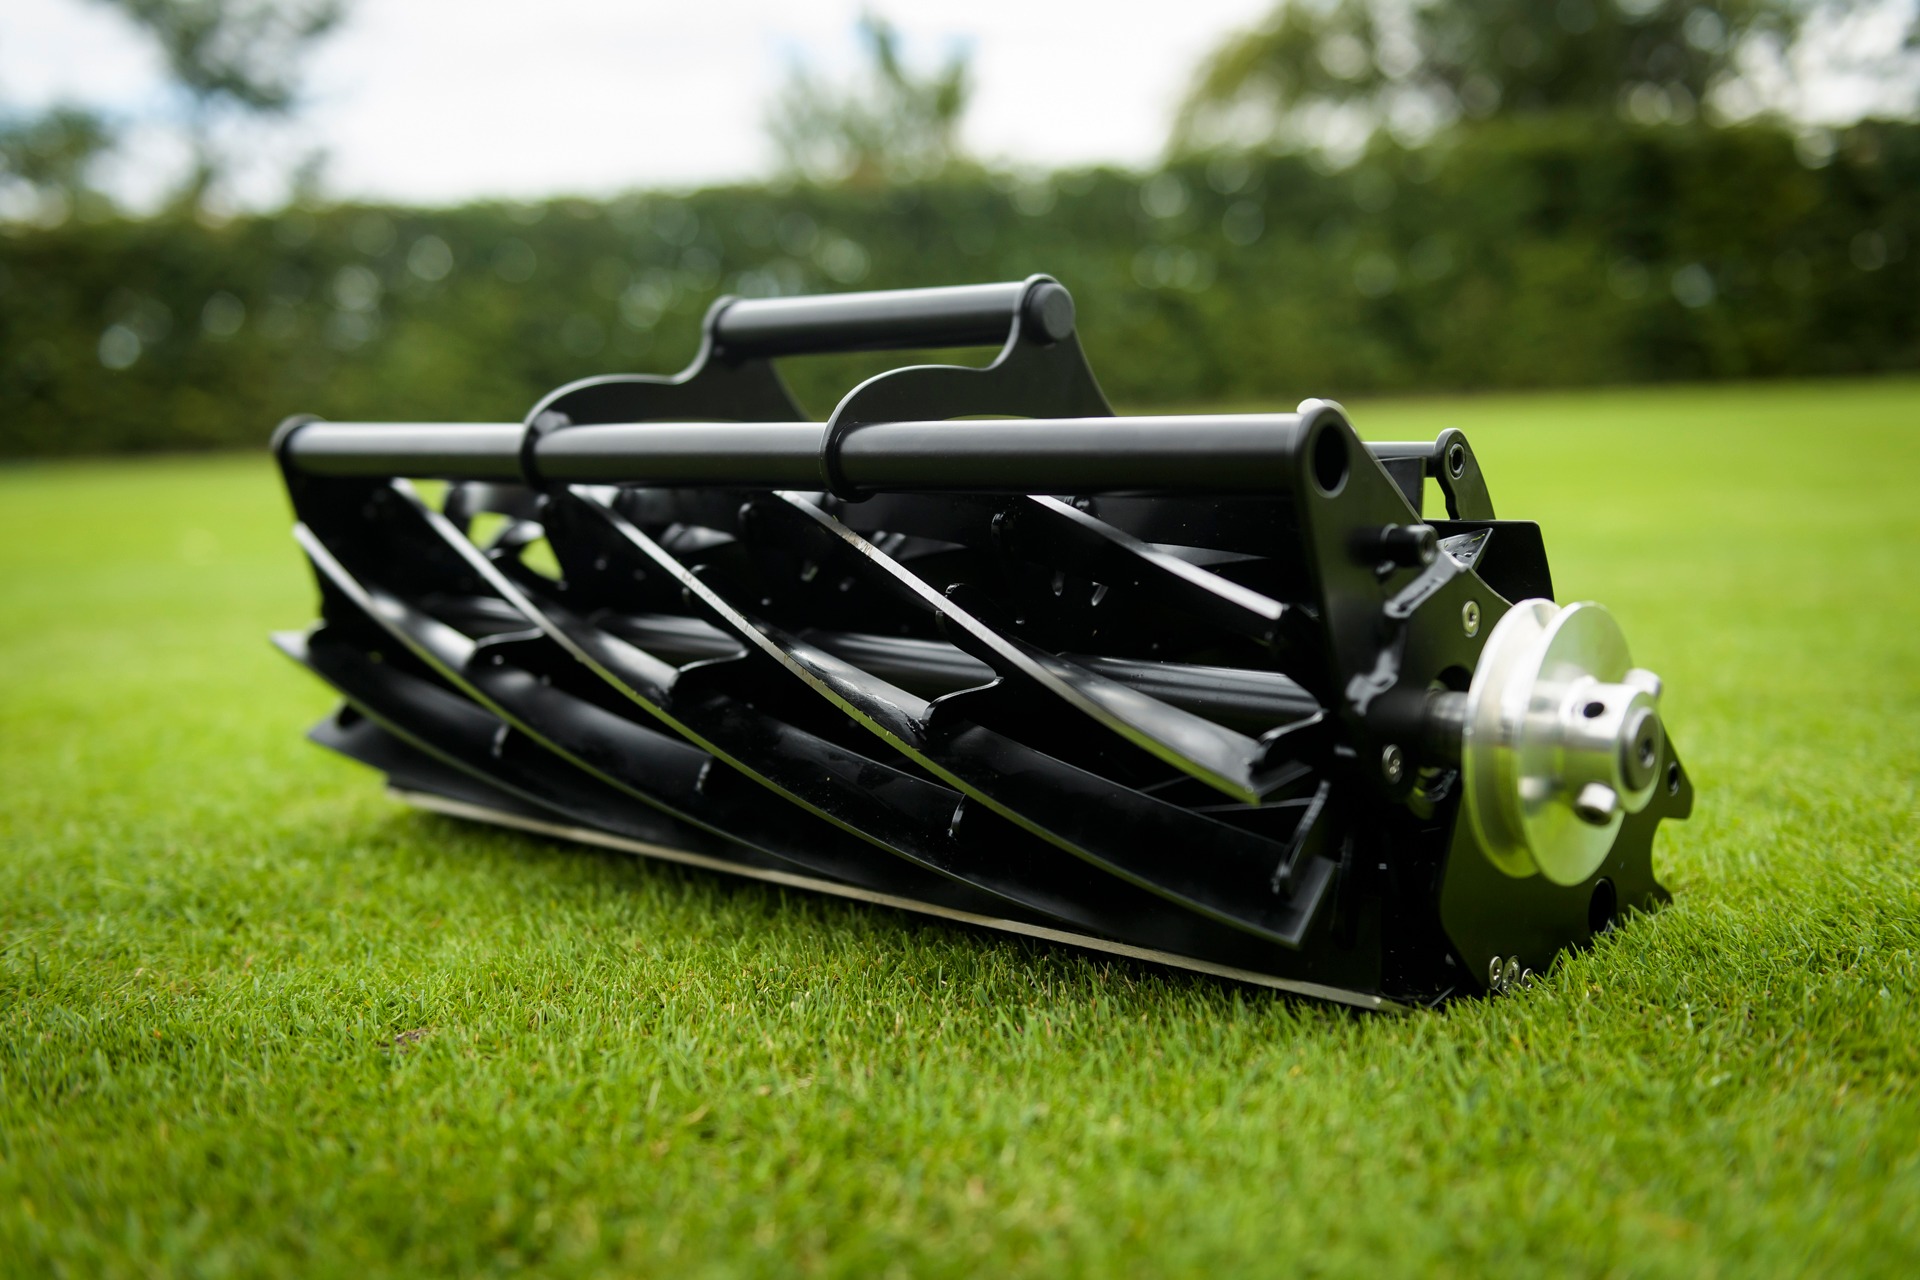 How to choose the right reel for your lawn